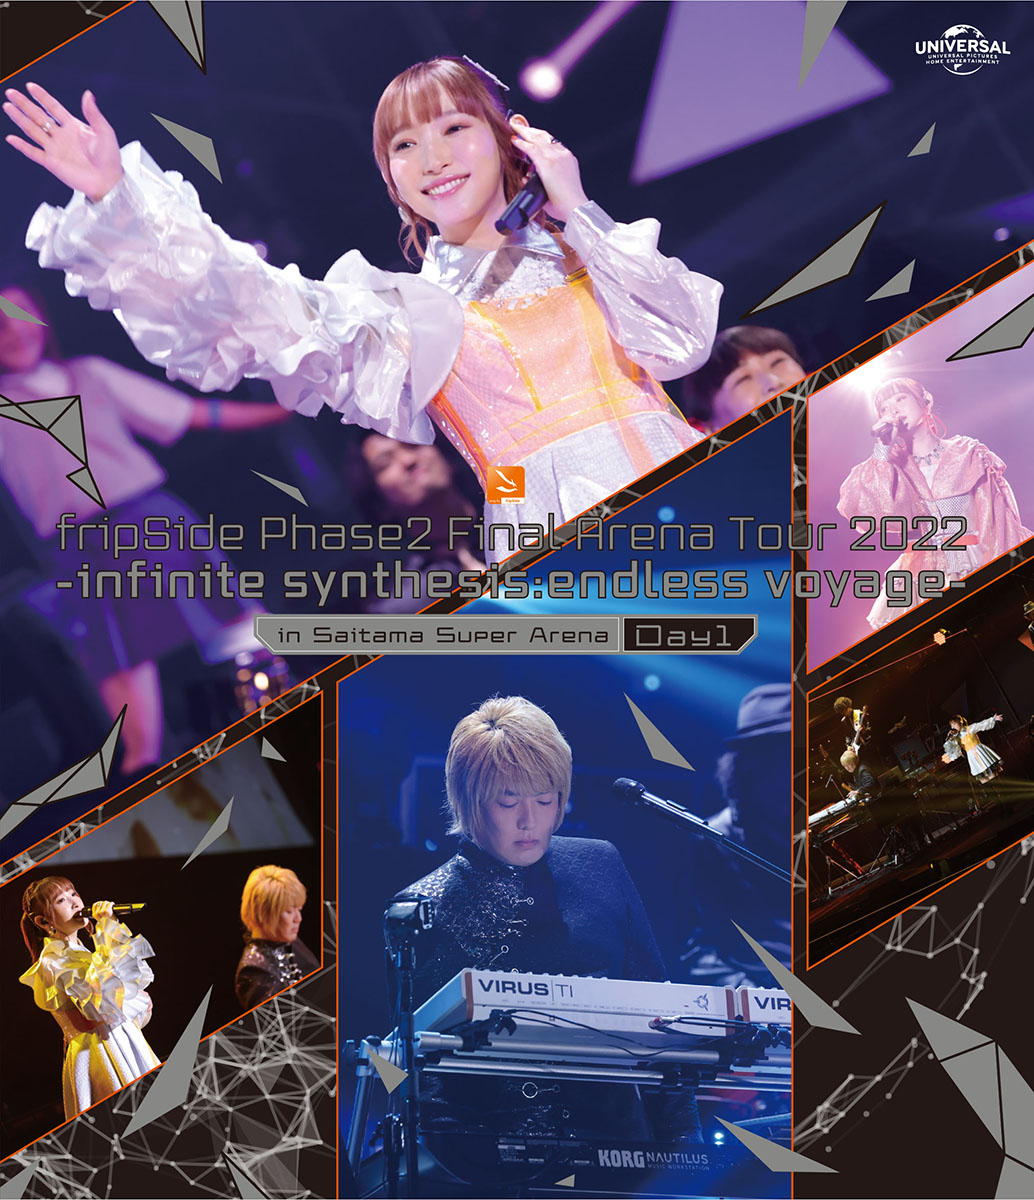 fripSide Phase2のファイナル公演のLive Blu-rayがリリース！ - 画像一覧（2/5）